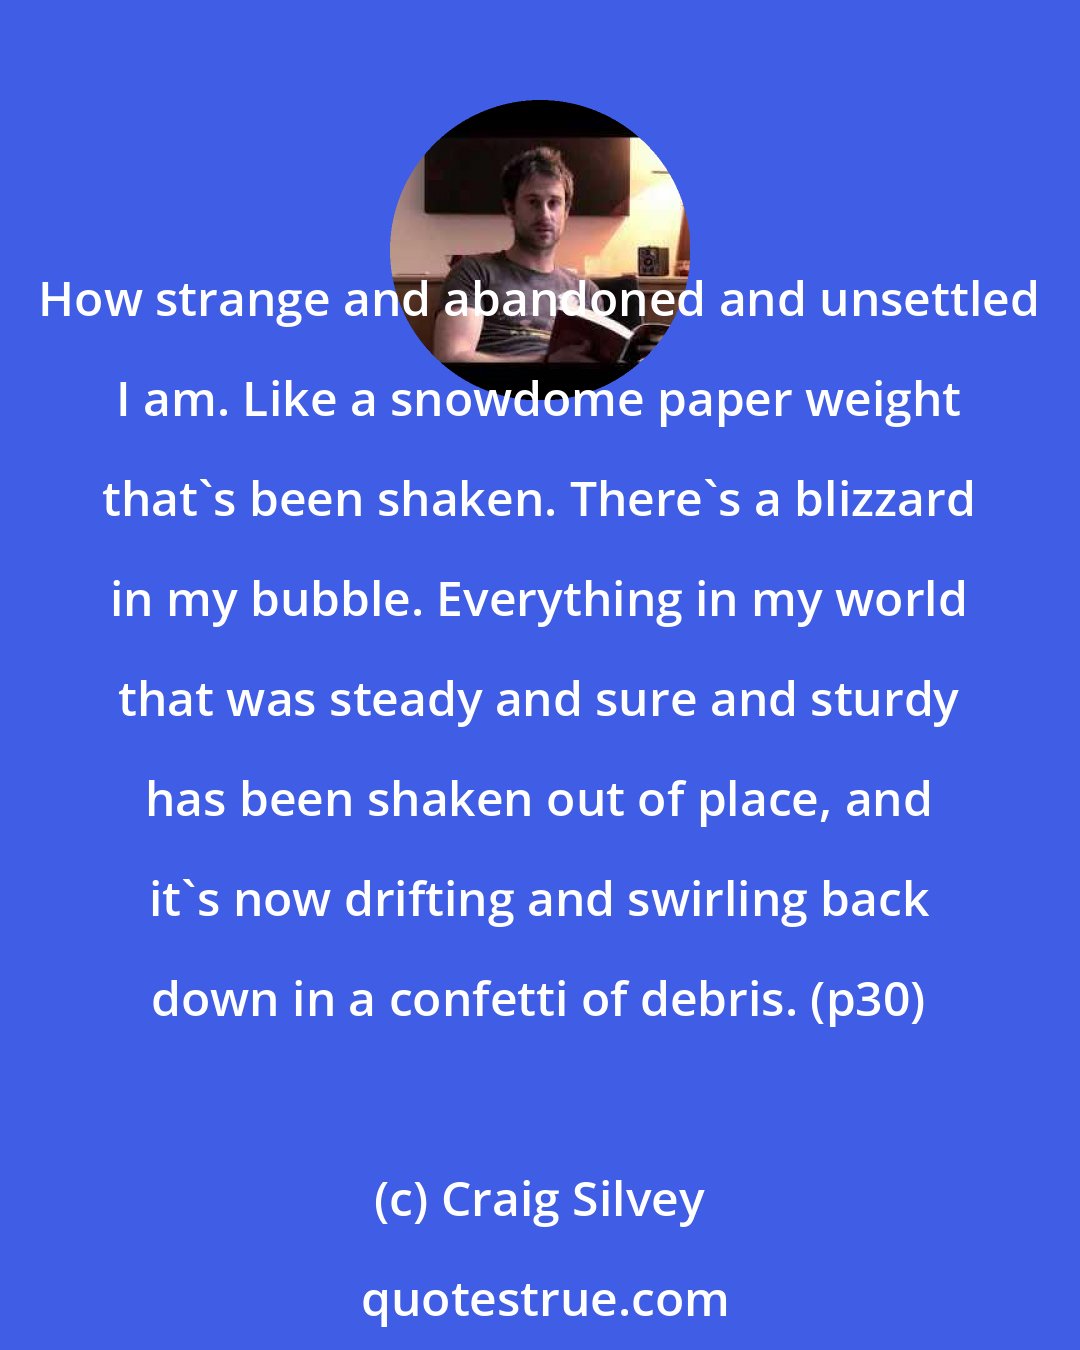 Craig Silvey: How strange and abandoned and unsettled I am. Like a snowdome paper weight that's been shaken. There's a blizzard in my bubble. Everything in my world that was steady and sure and sturdy has been shaken out of place, and it's now drifting and swirling back down in a confetti of debris. (p30)